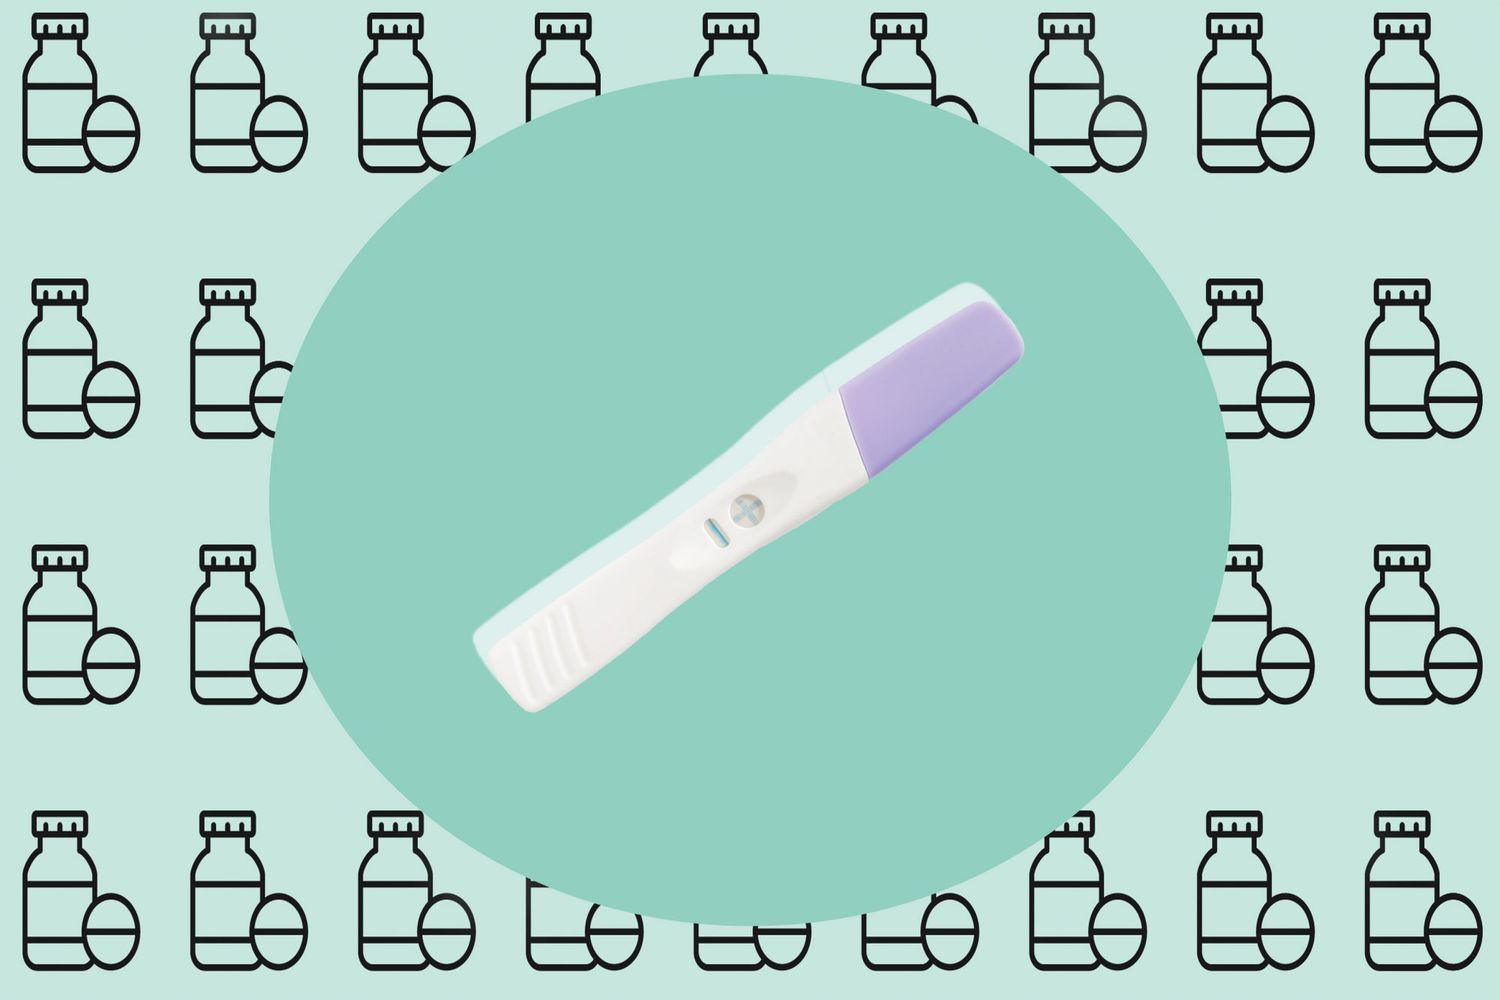 An image of a pregnancy test on a patterned background.